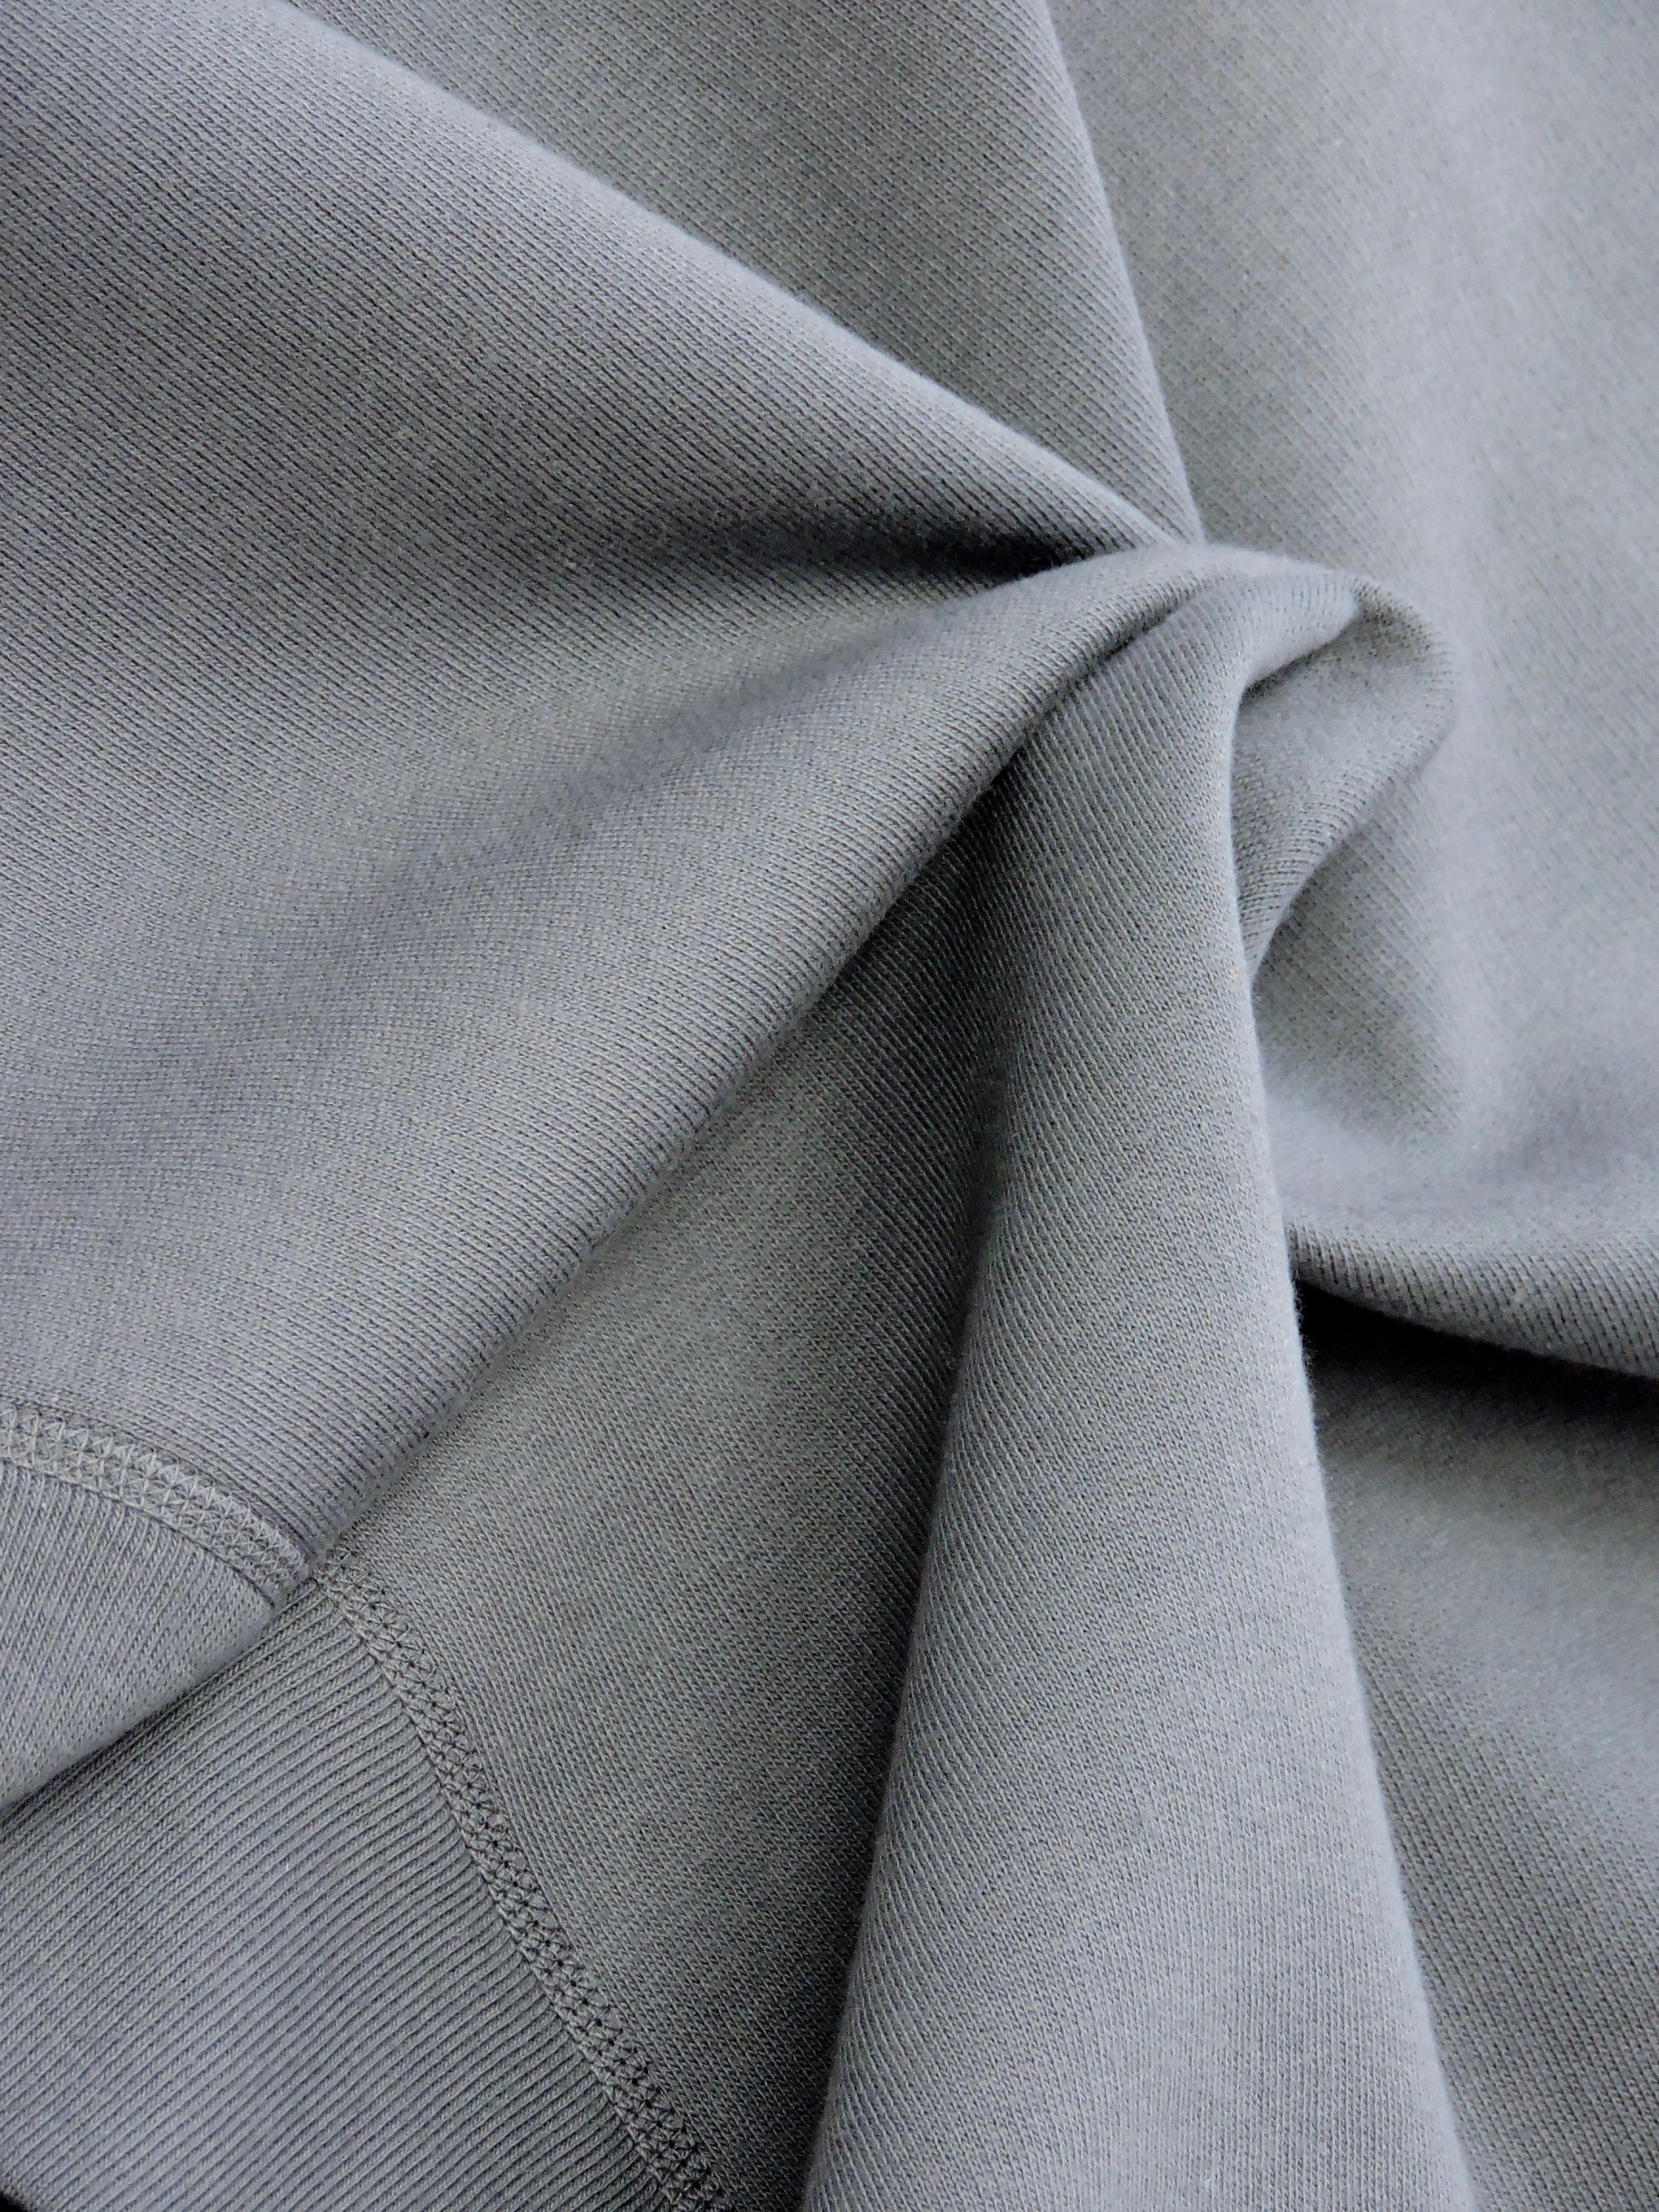 Close up of cotton material of the sweater